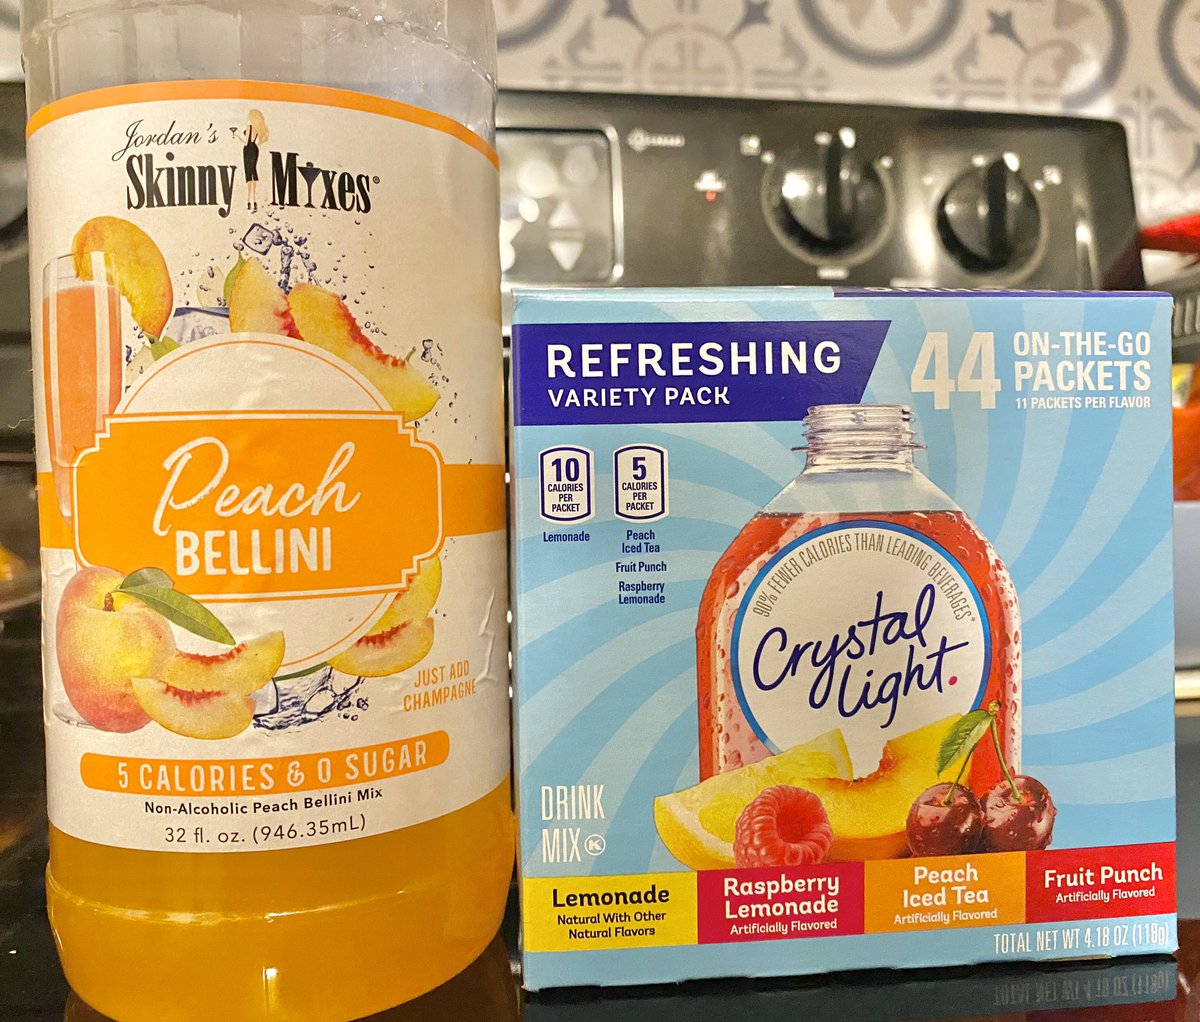 1 packet of the crystal light peach iced tea mixed with 1 pump of @SkinnyMixes peach Bellini syrup and I’m in heaven… delicious 🍑🫖